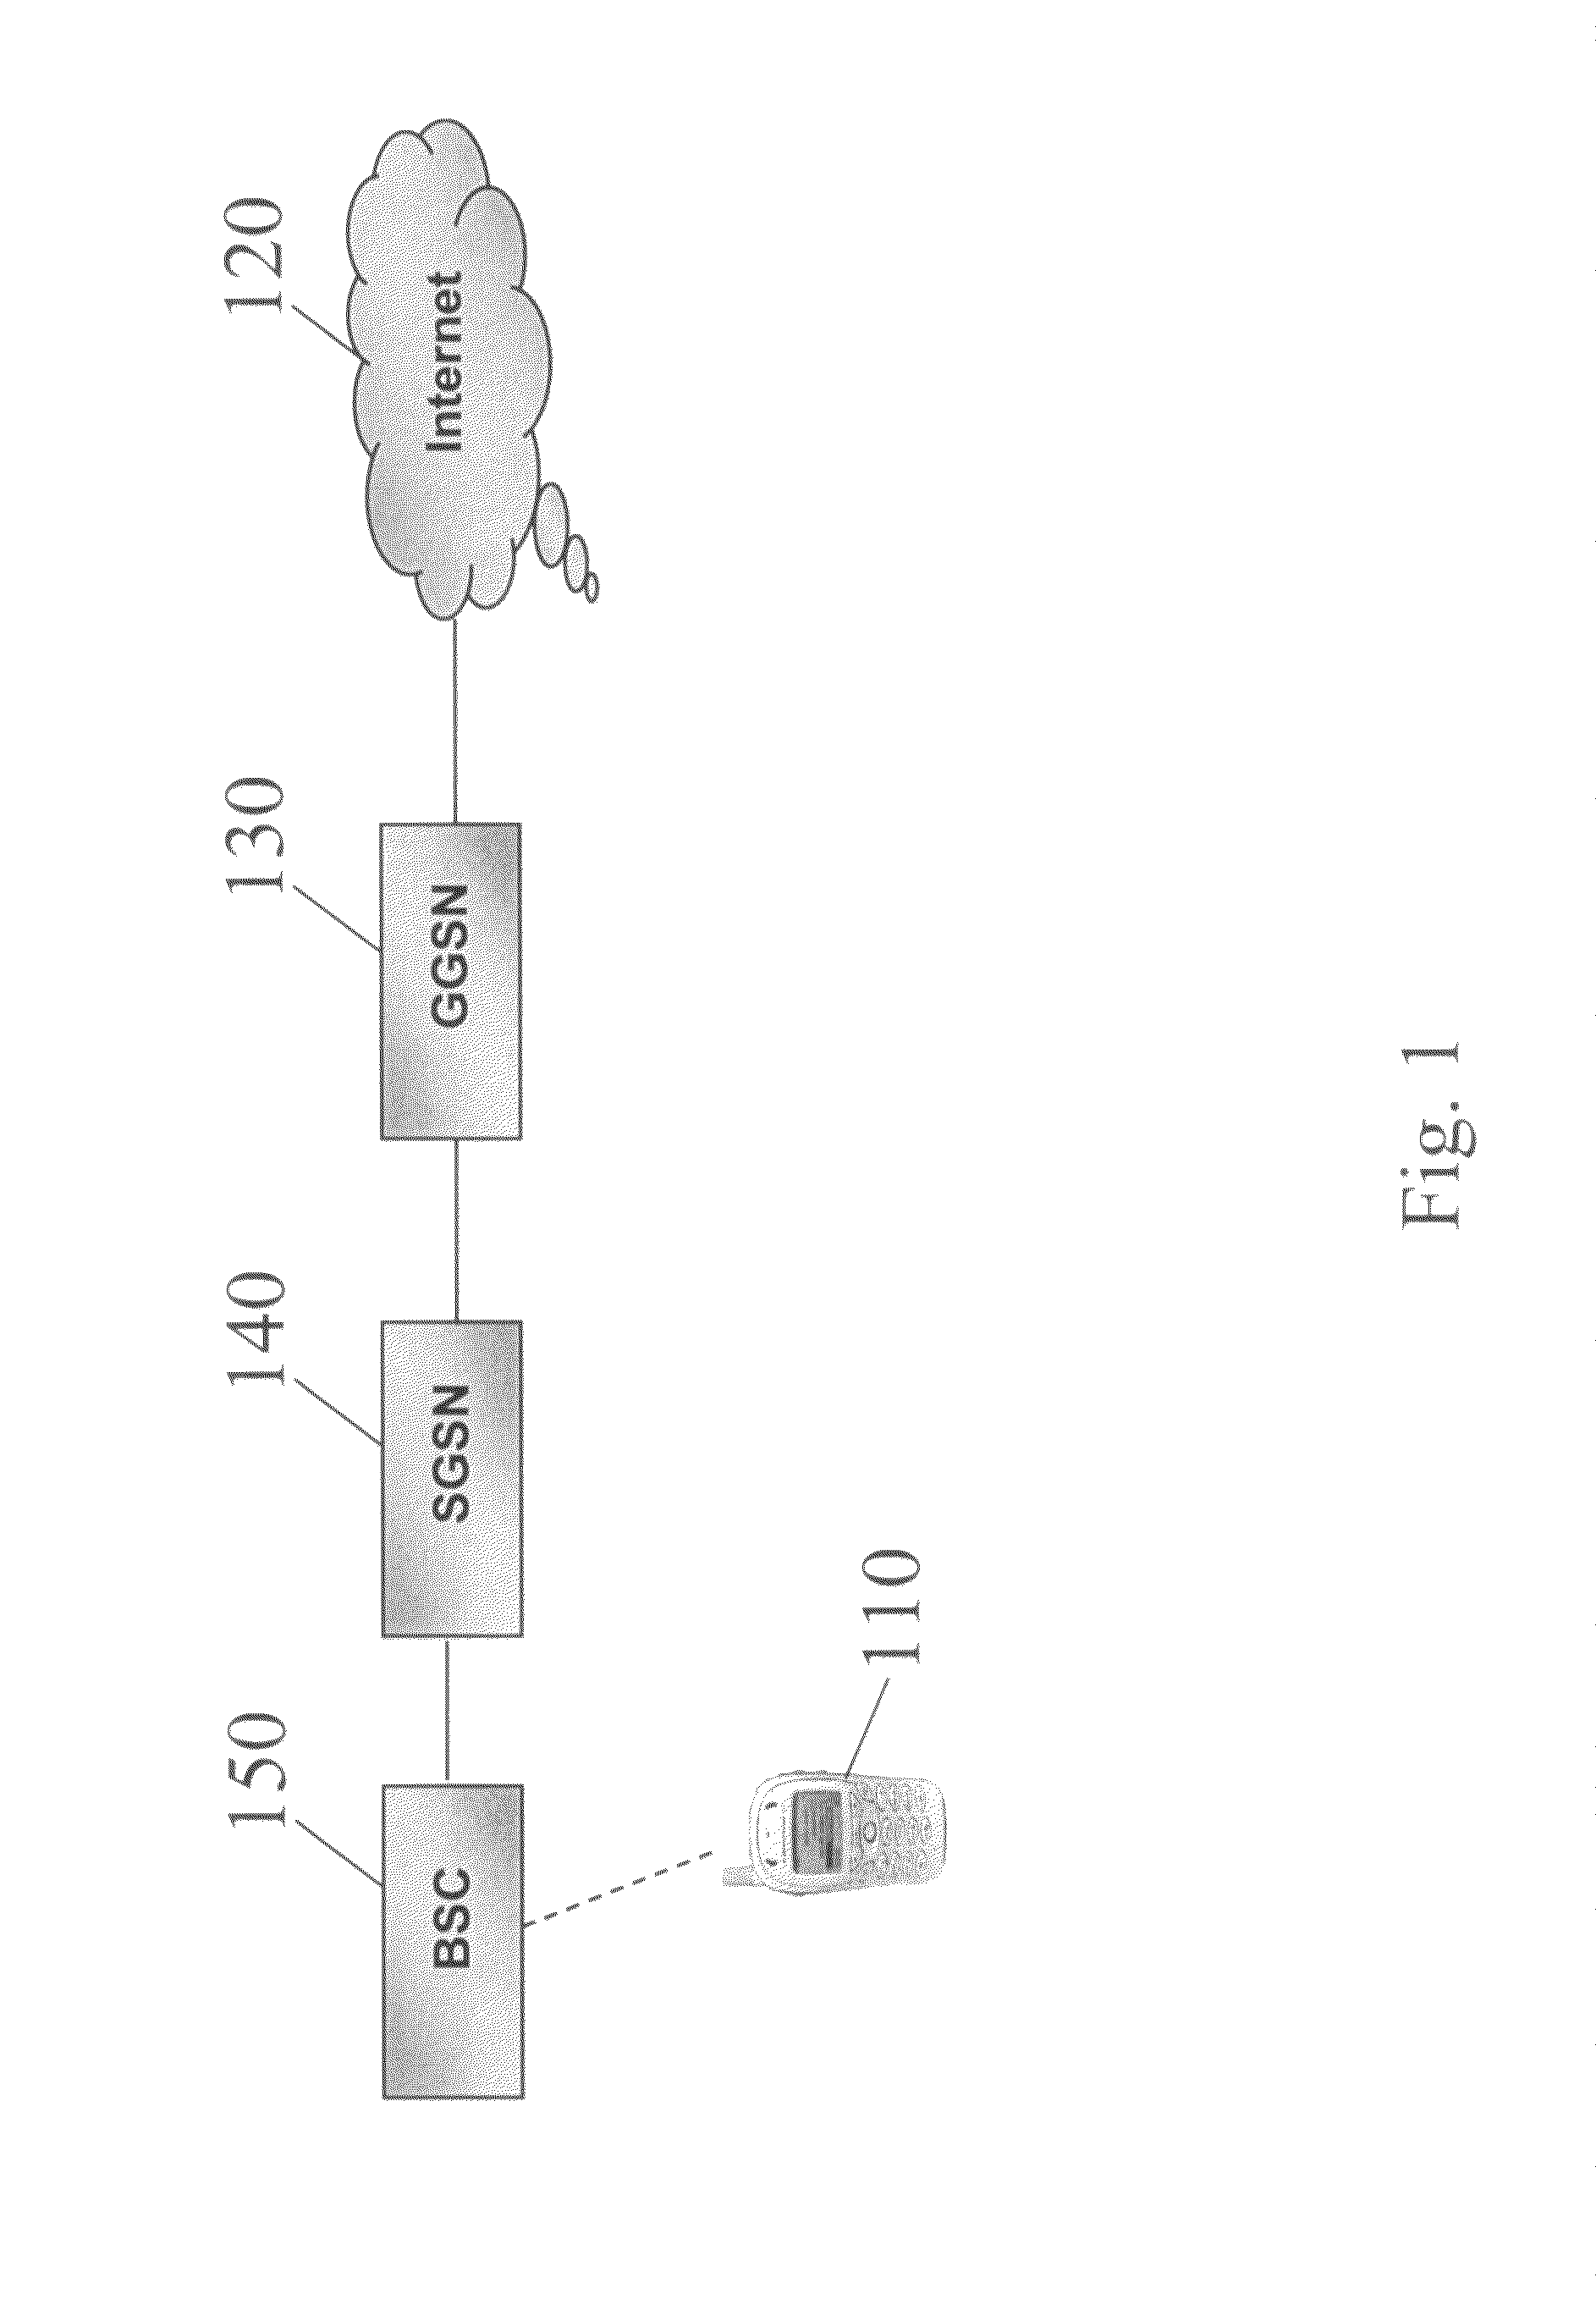 Systems and methods for enabling IP signaling in wireless networks